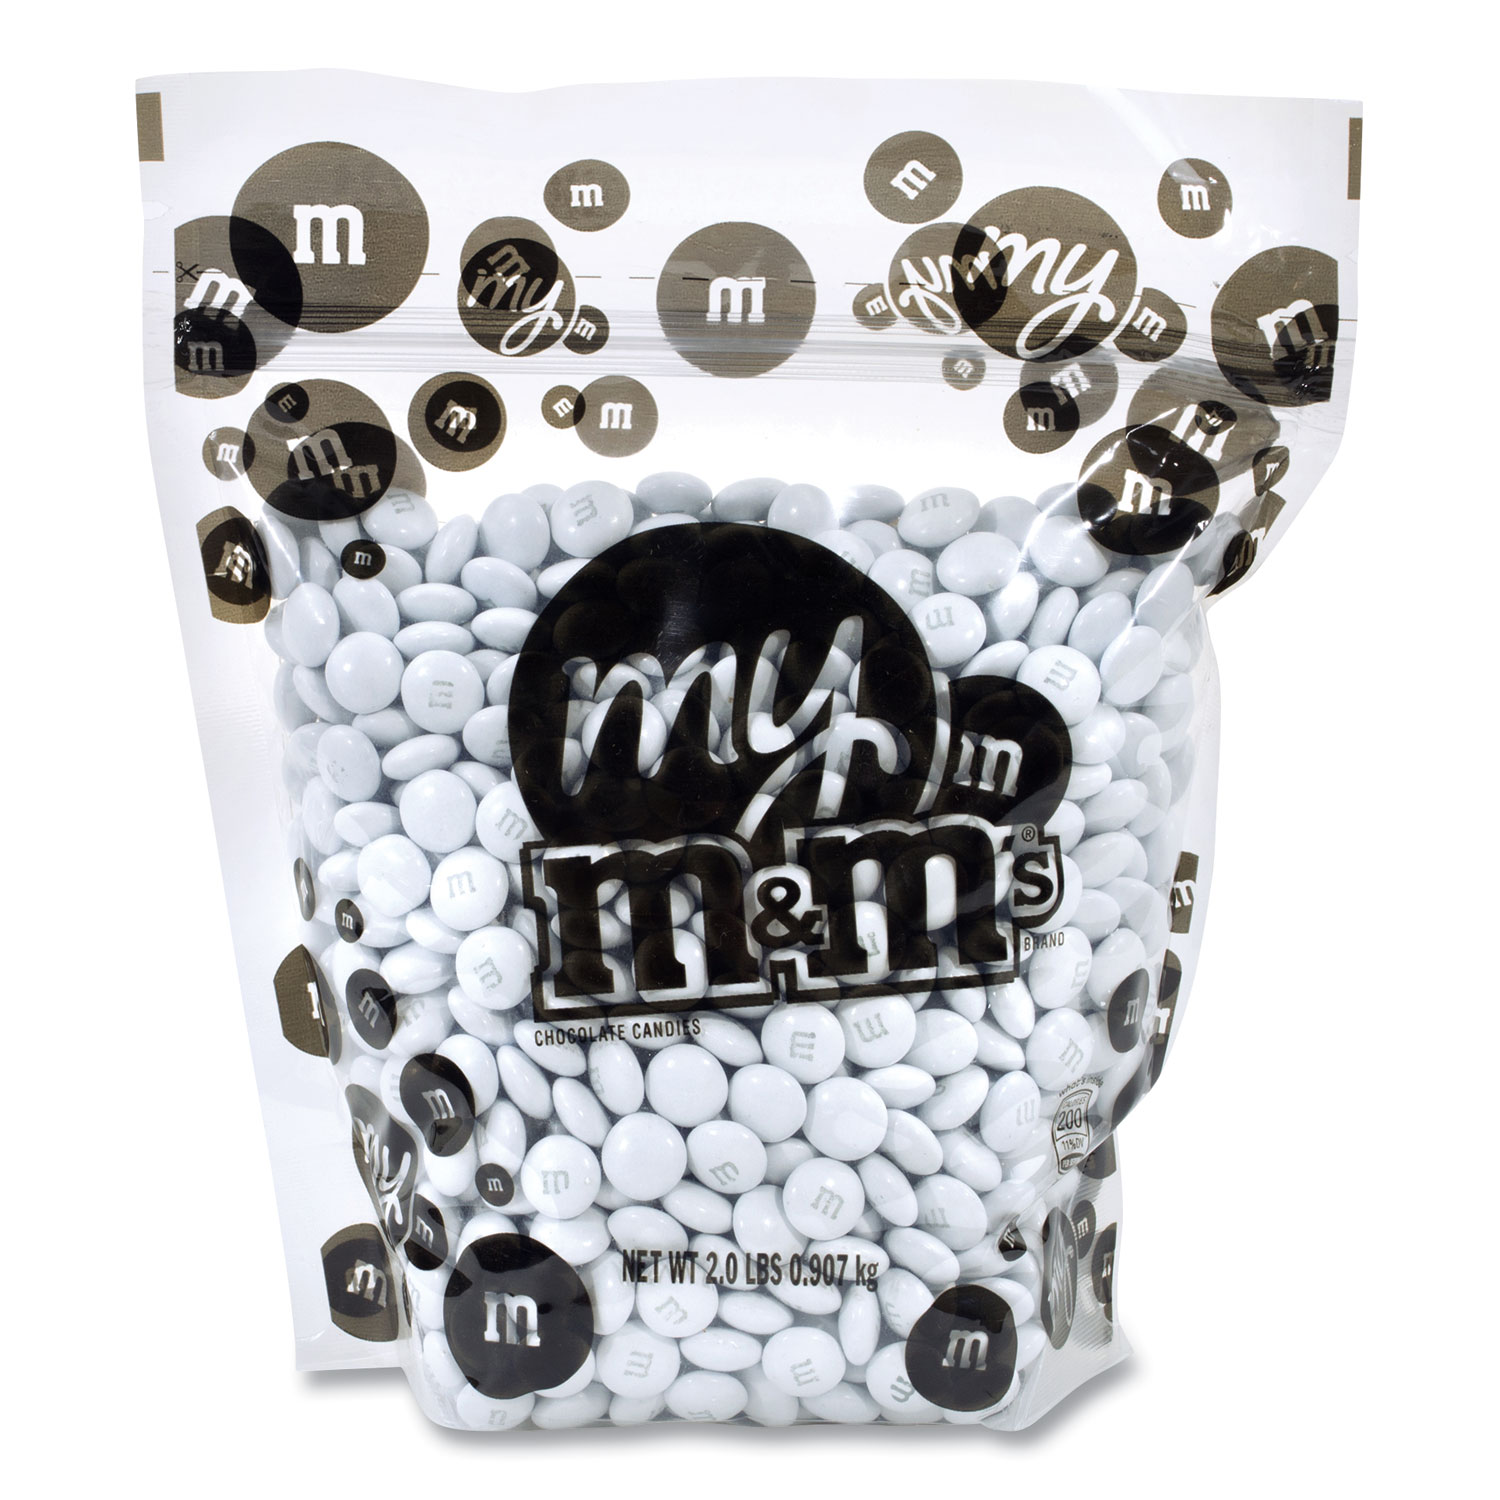  M & M's D01069 My M and M's Bulk Candies, 2 lb Bag, White, Free Delivery in 1-4 Business Days (GRR22500011) 